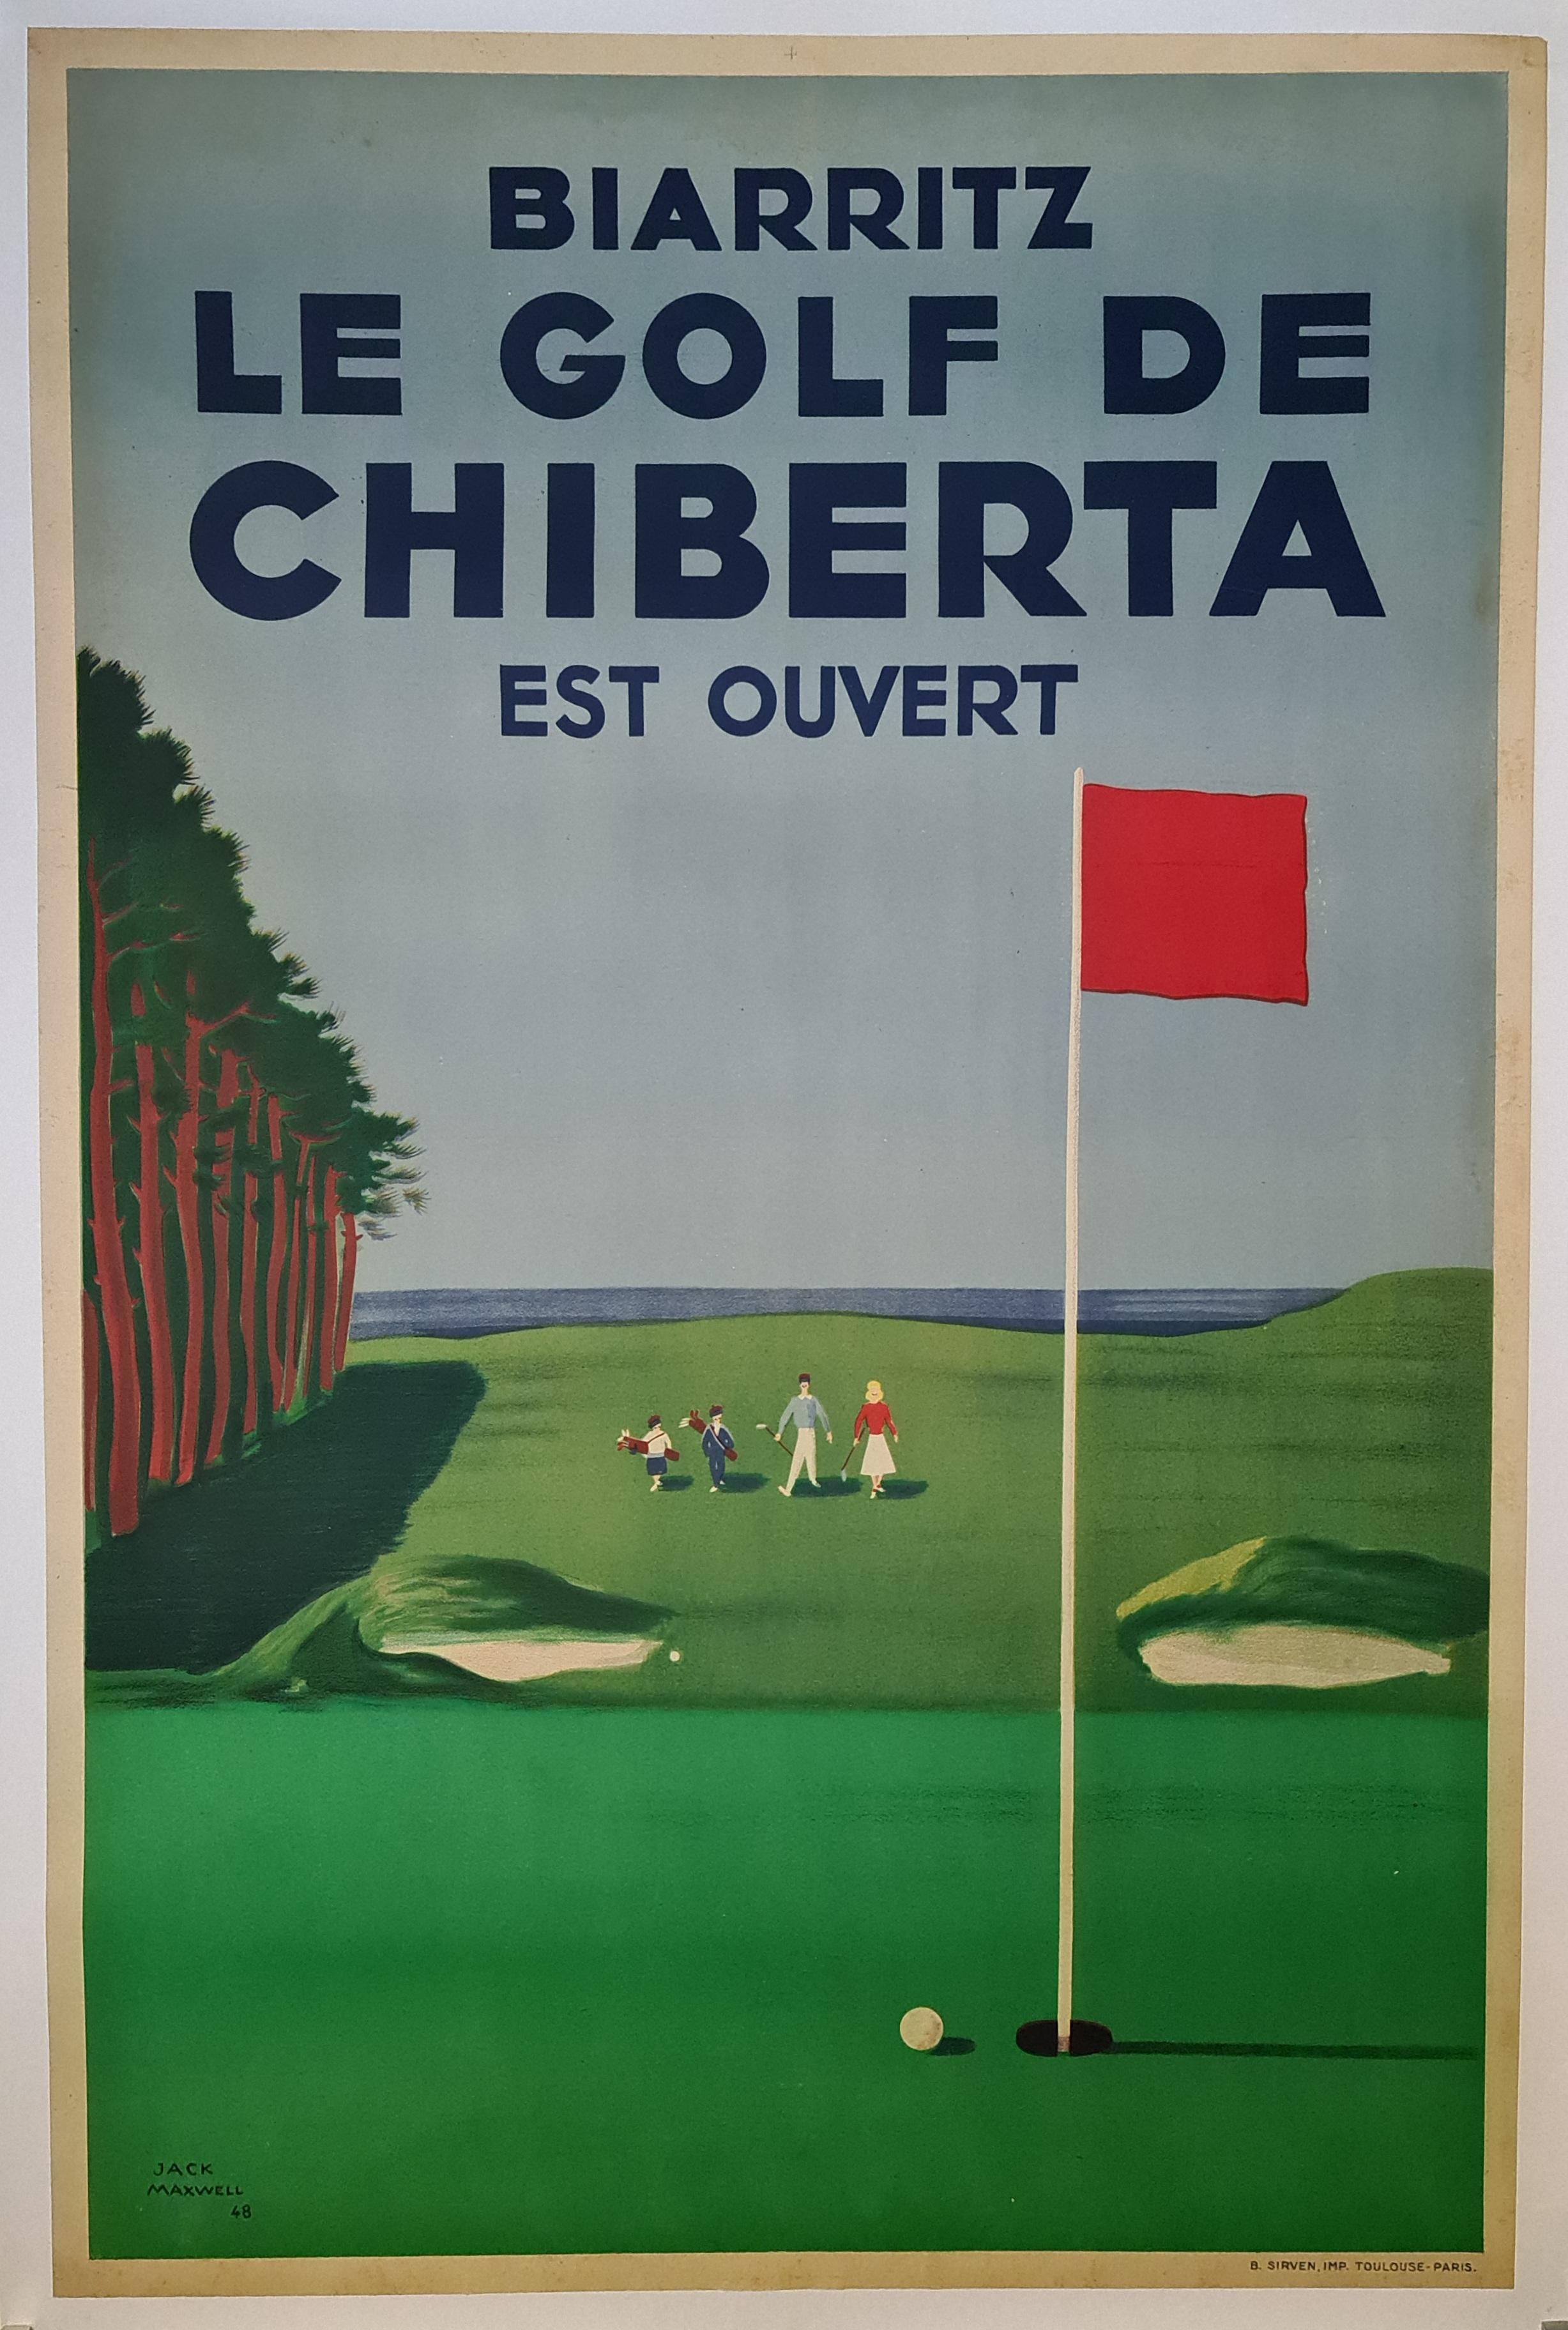 Original poster made by Jack Maxwell in 1948 - Biarritz Le golf de Chiberta For Sale 1